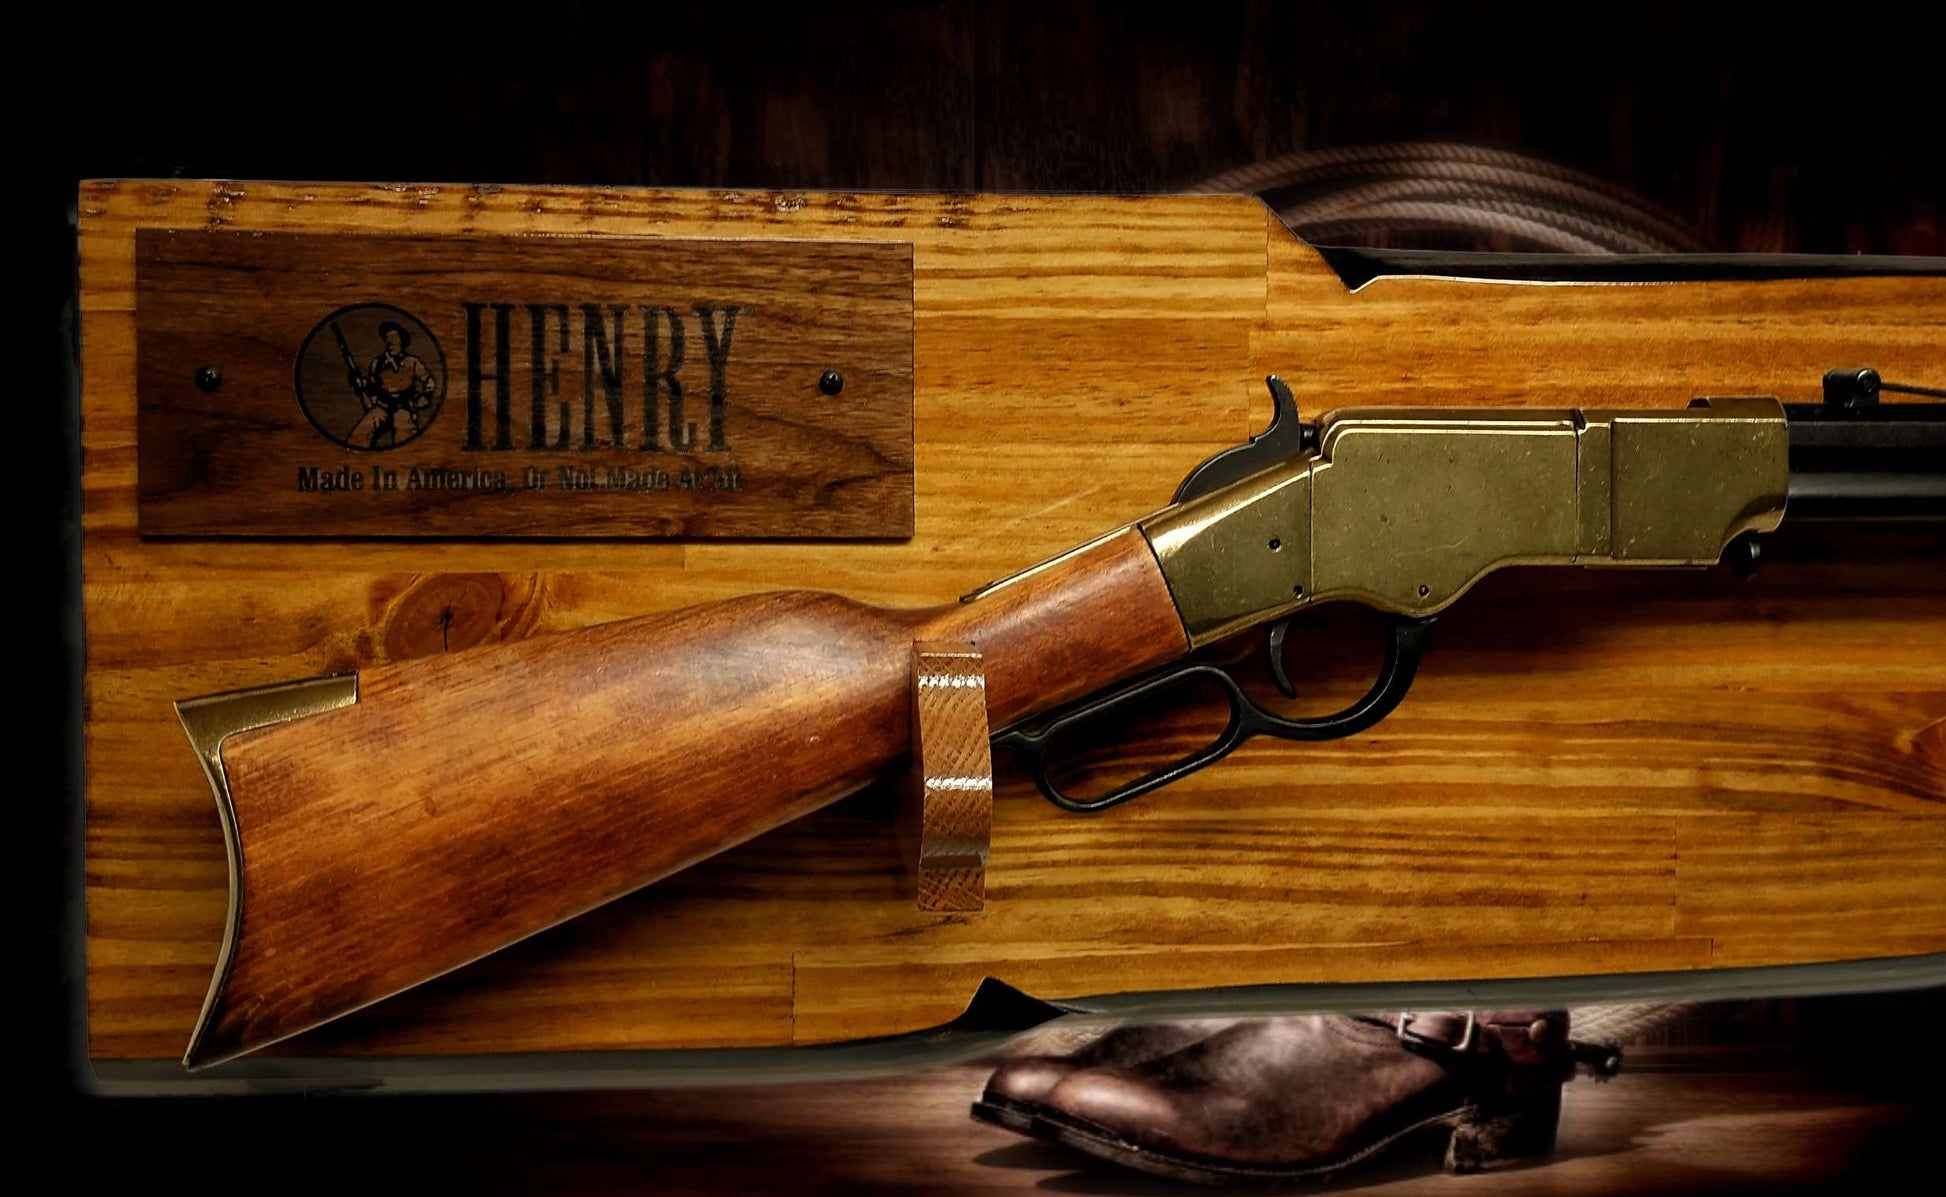 Walker Wood Gifts Rustic Lever Action Henry Gun Display Rifle Faux Live Edge Knotty Pine Cabin Décor Collectors Gift